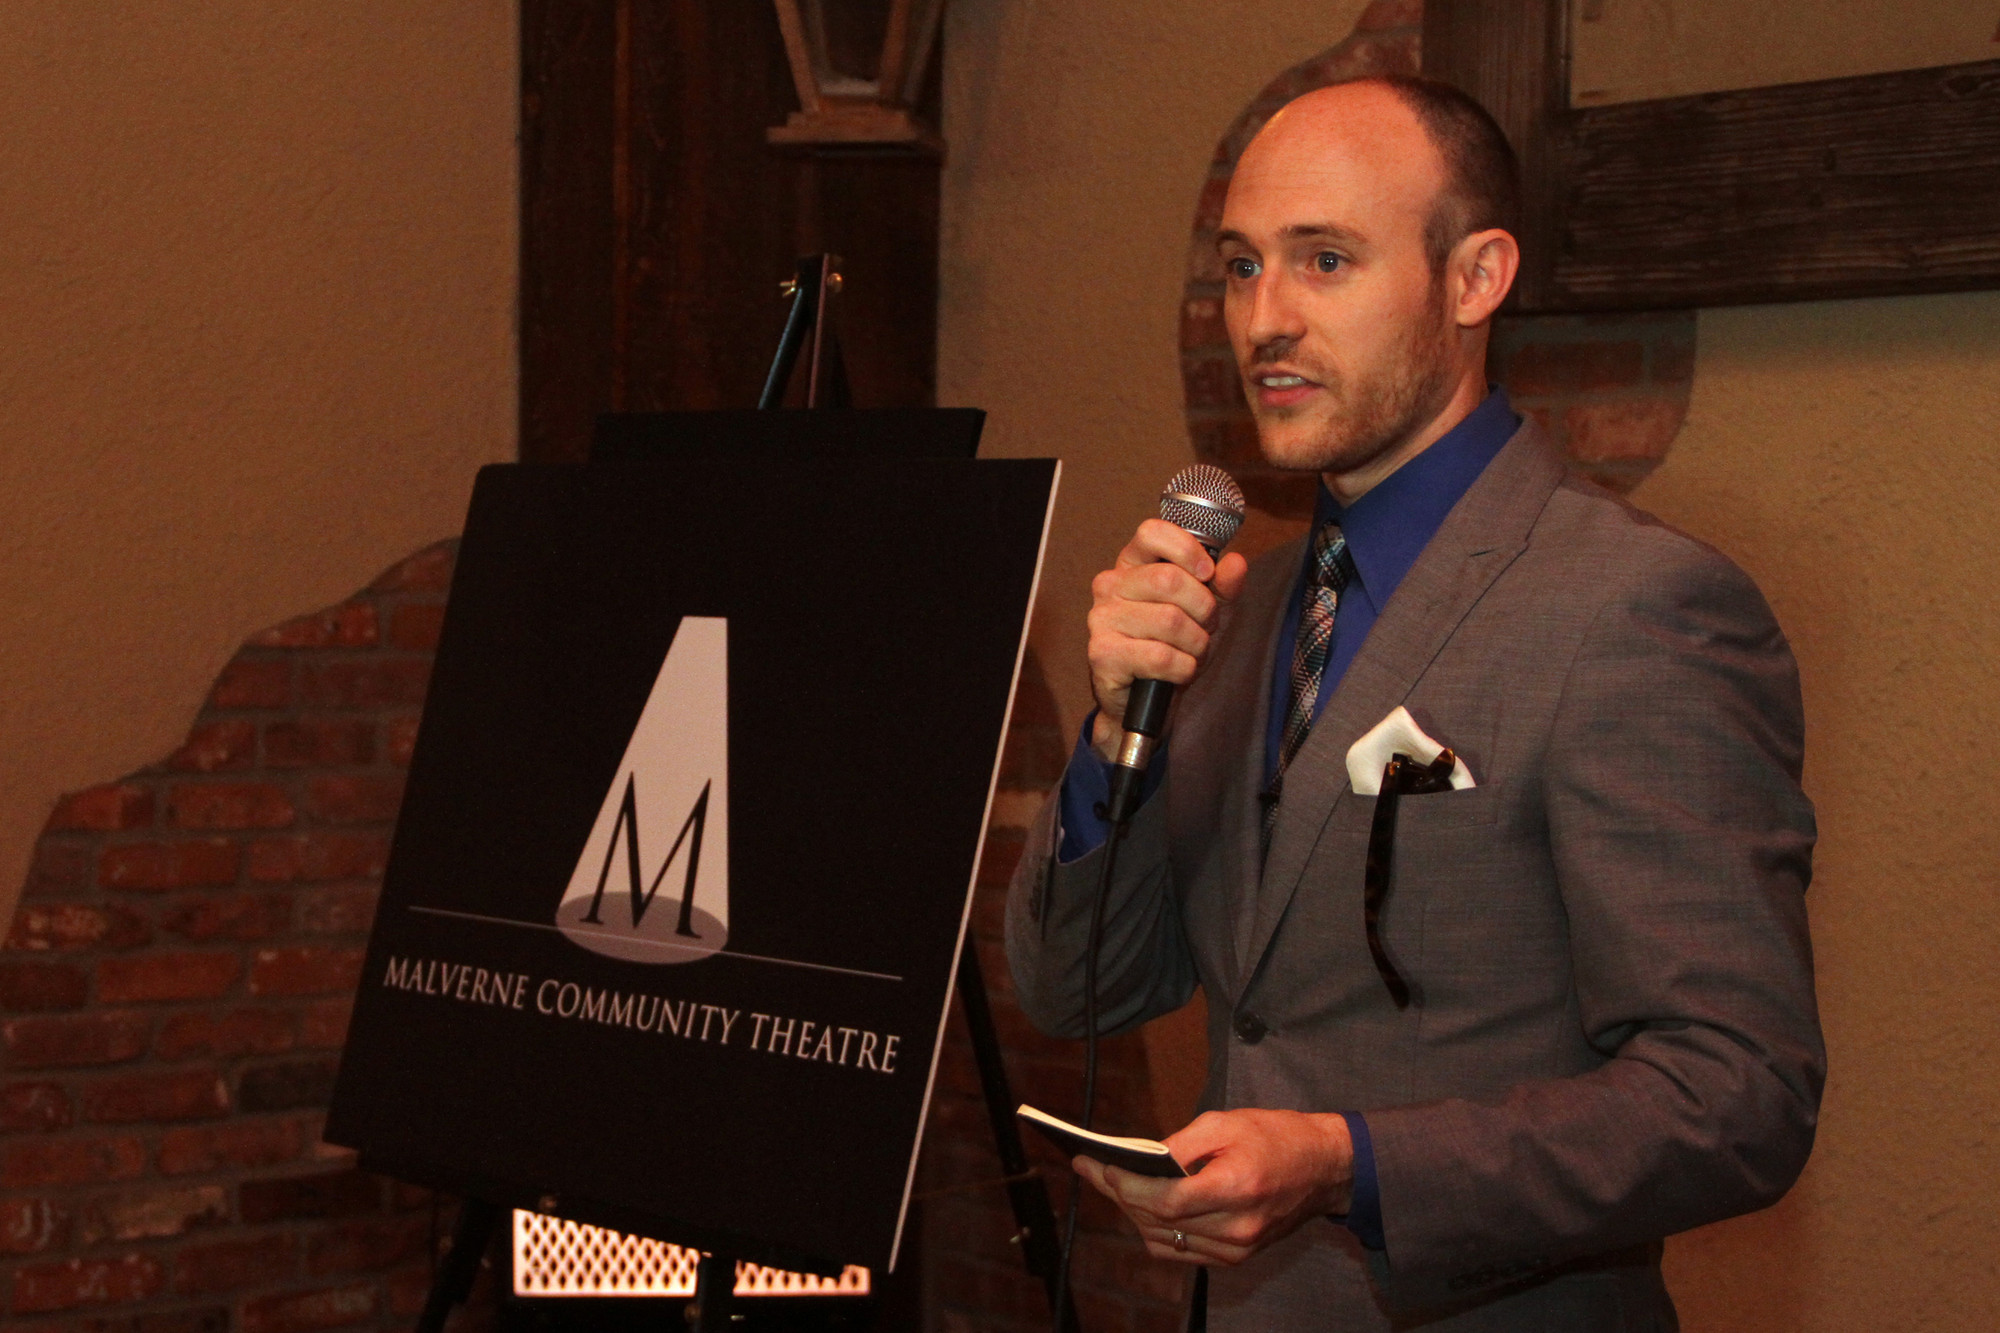 Malverne Community Theatre President Dave Coonan welcomed the crowd.